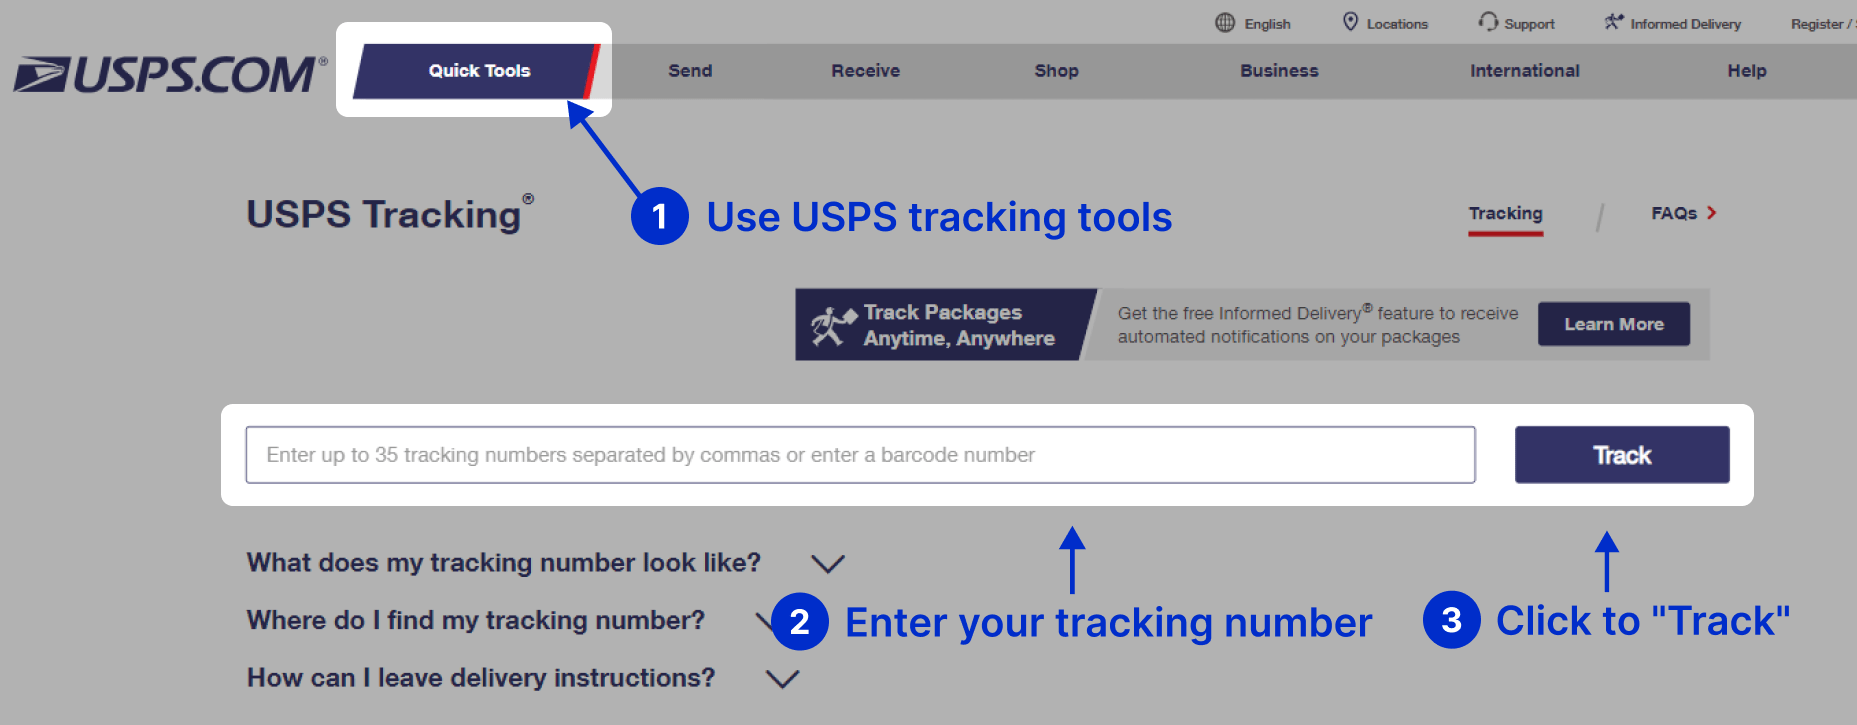 USPS Tracking. Learn how to track packages via USPS official webiste on your computer. Enter your tracking number on the USPS tracking page.